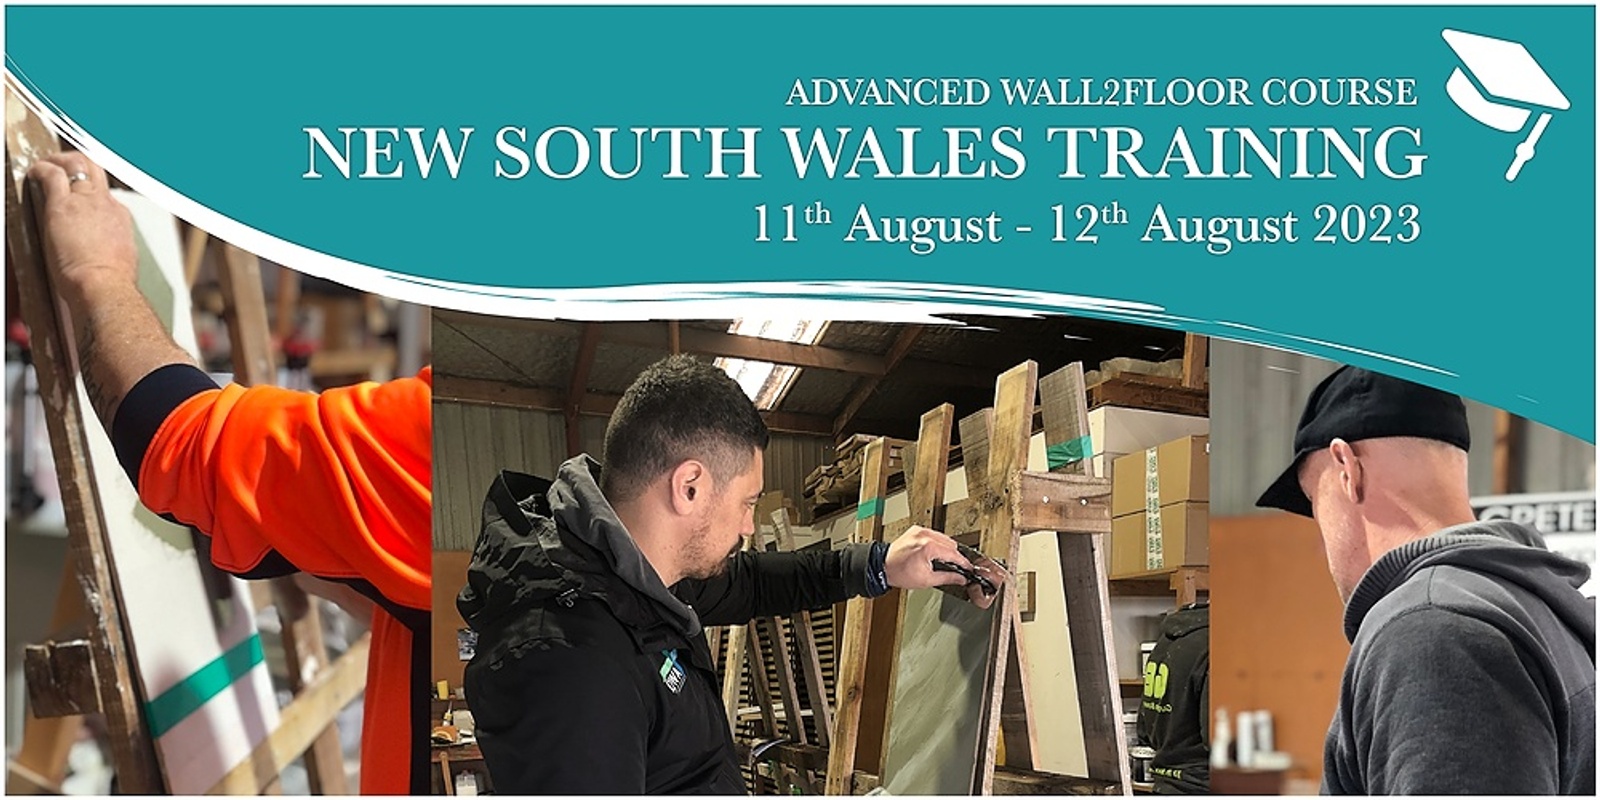 New South Wales - Advanced Wall2Floor Course - (11th August - 12th August 2023)